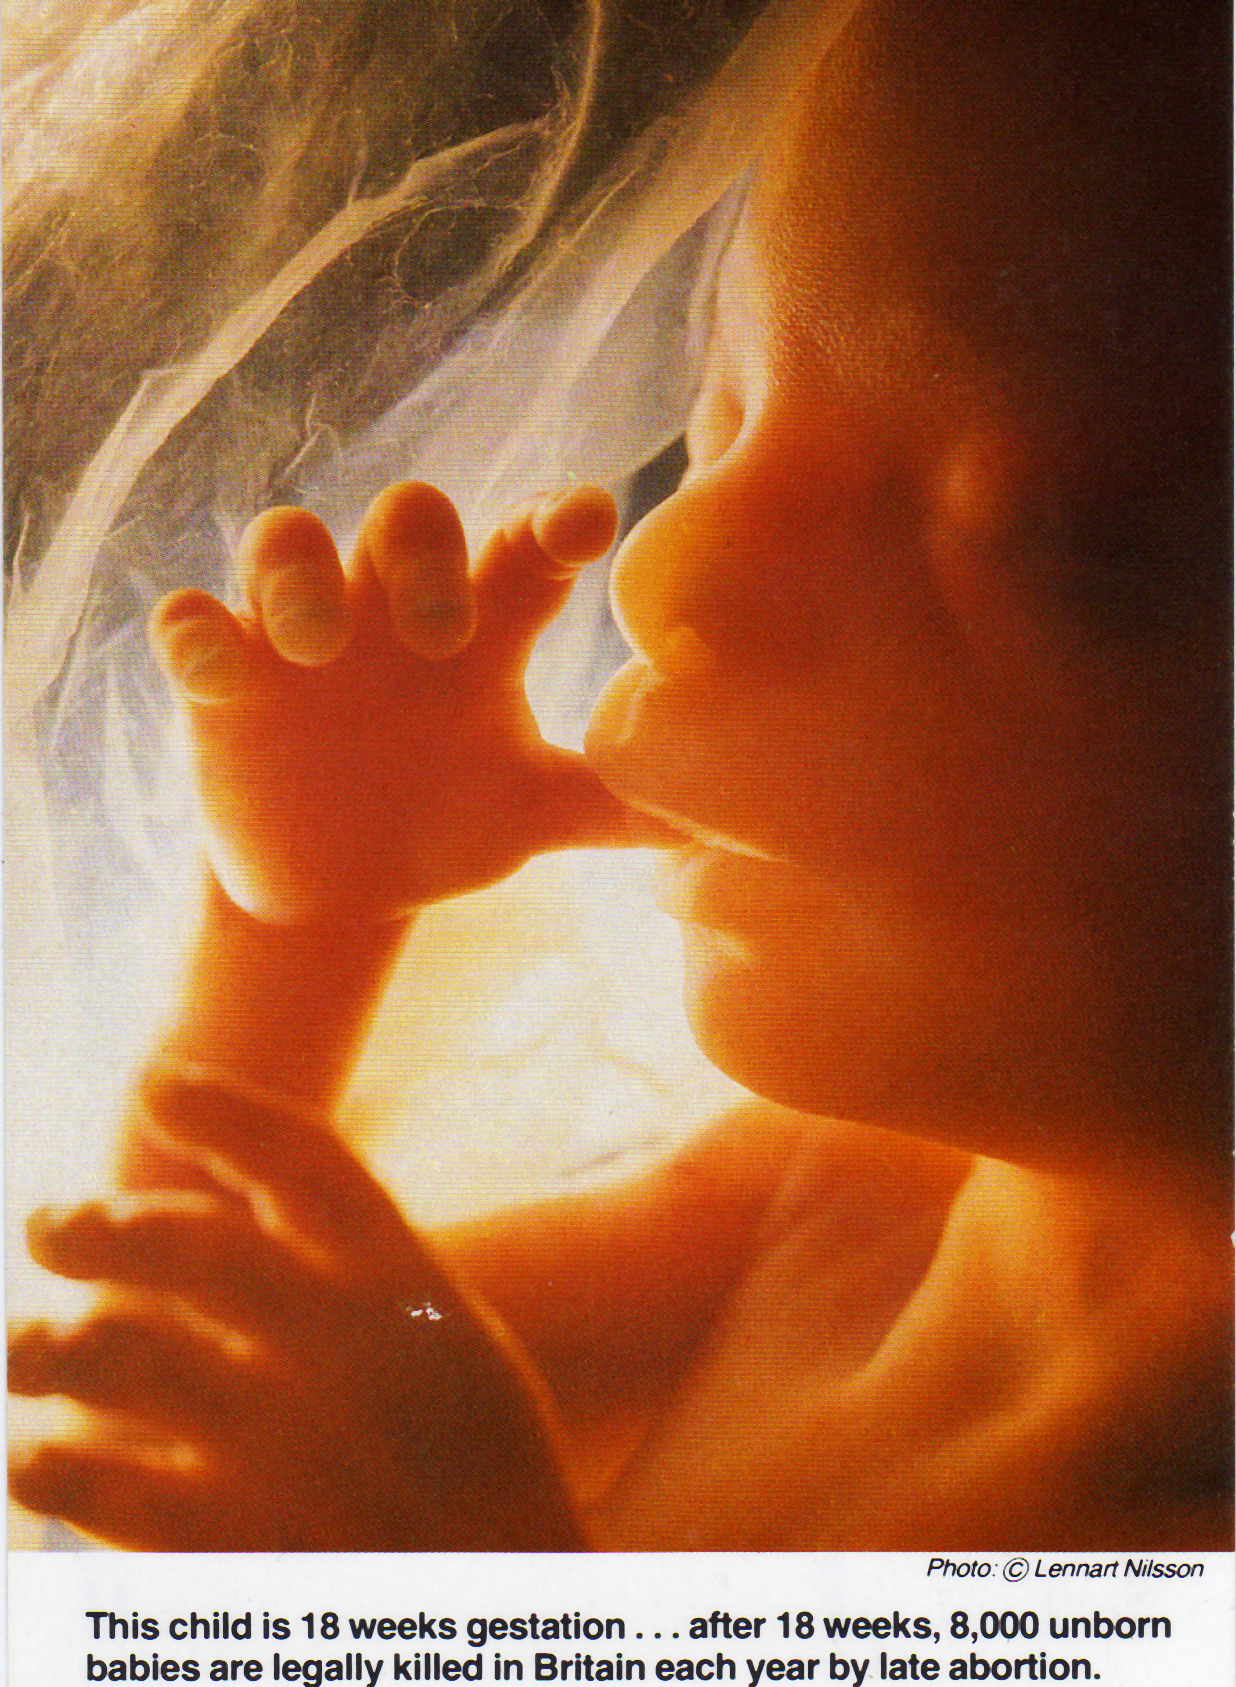 1987 The photographer, Lenart Neilson, gave permission for this picture of the unborn baby at 18 weeks to be used for the Alton Bill campaign. 1 million were printed-1